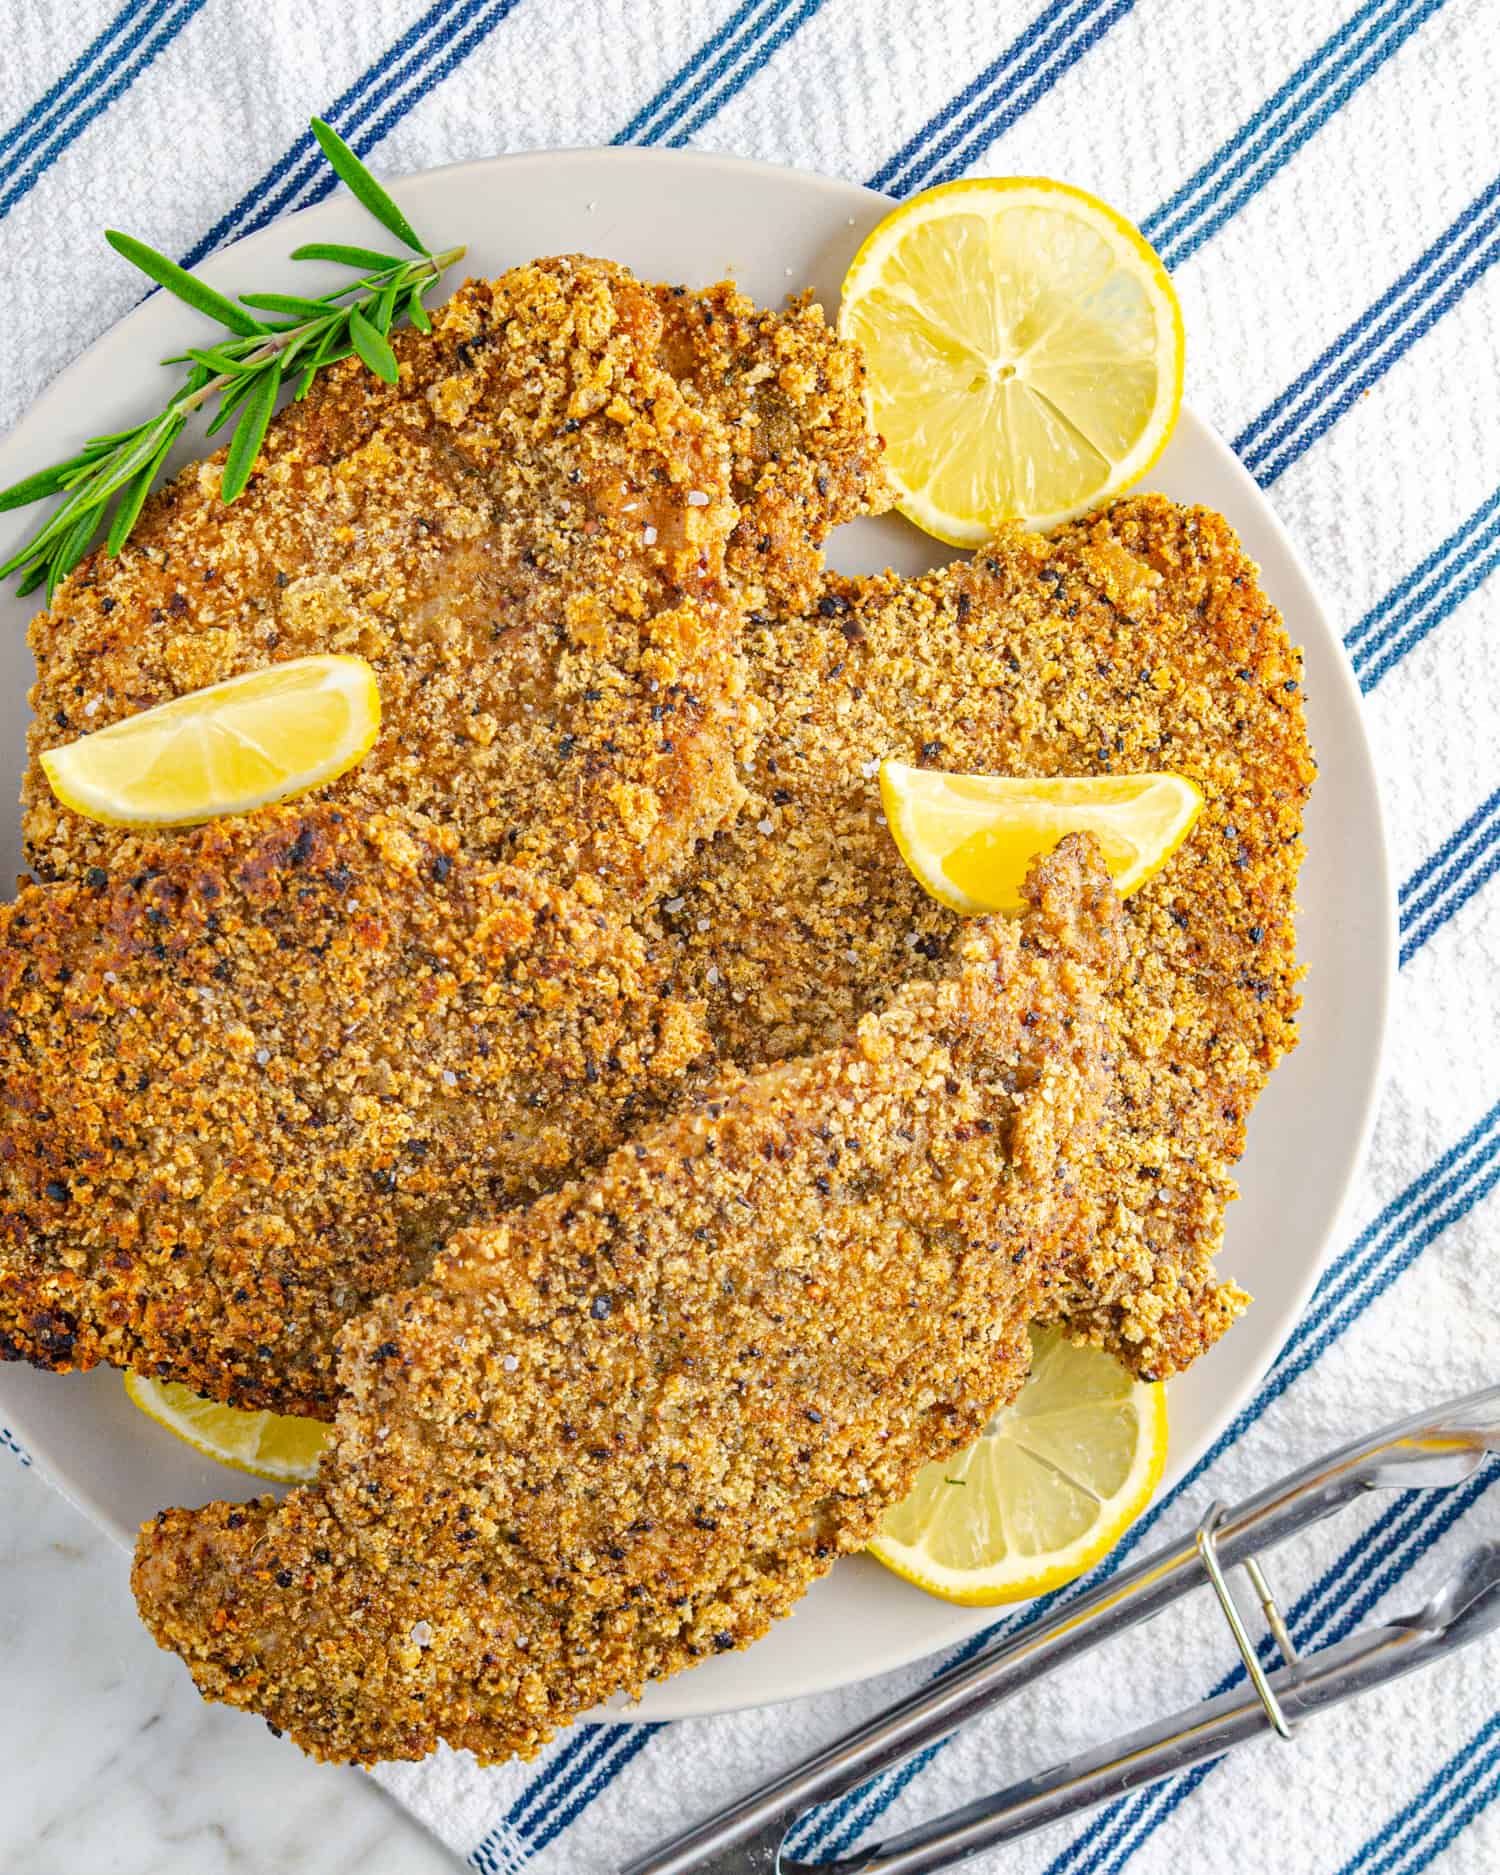 Pork schnitzel piled on a plate with lemon wedges